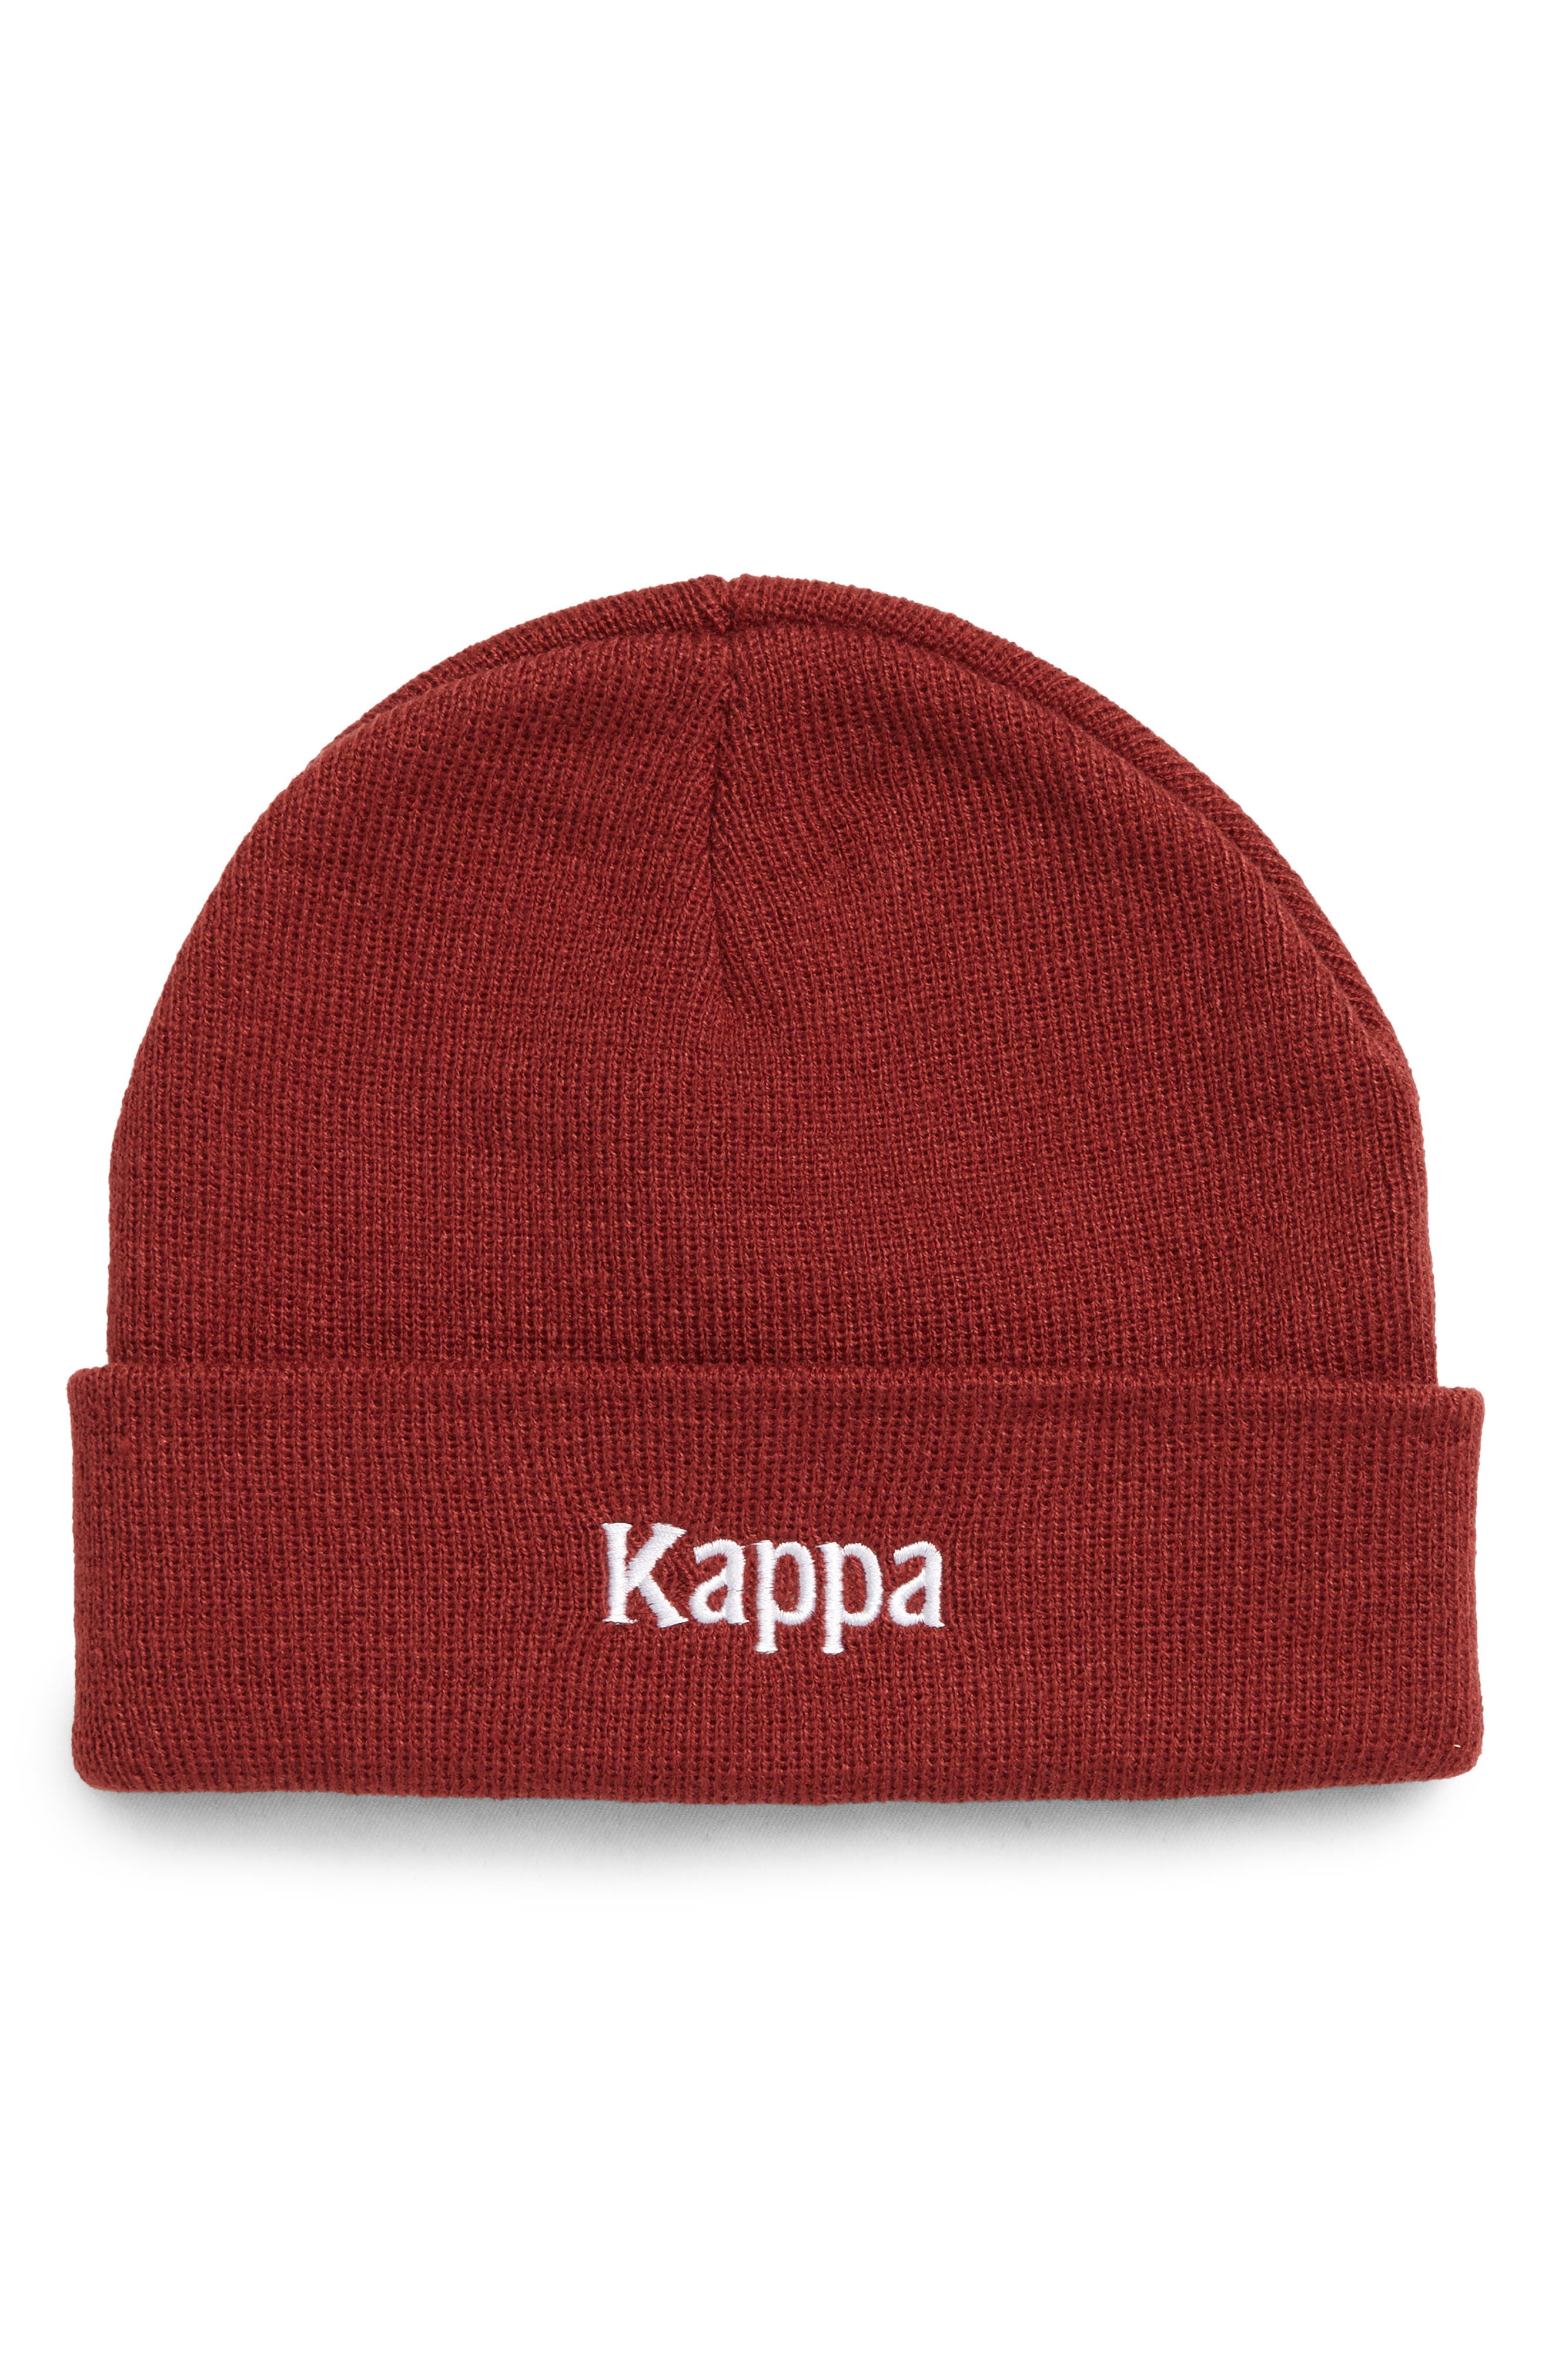 Kappa Authentic Giada Beanie in Red Earth-White Bright at Nordstrom